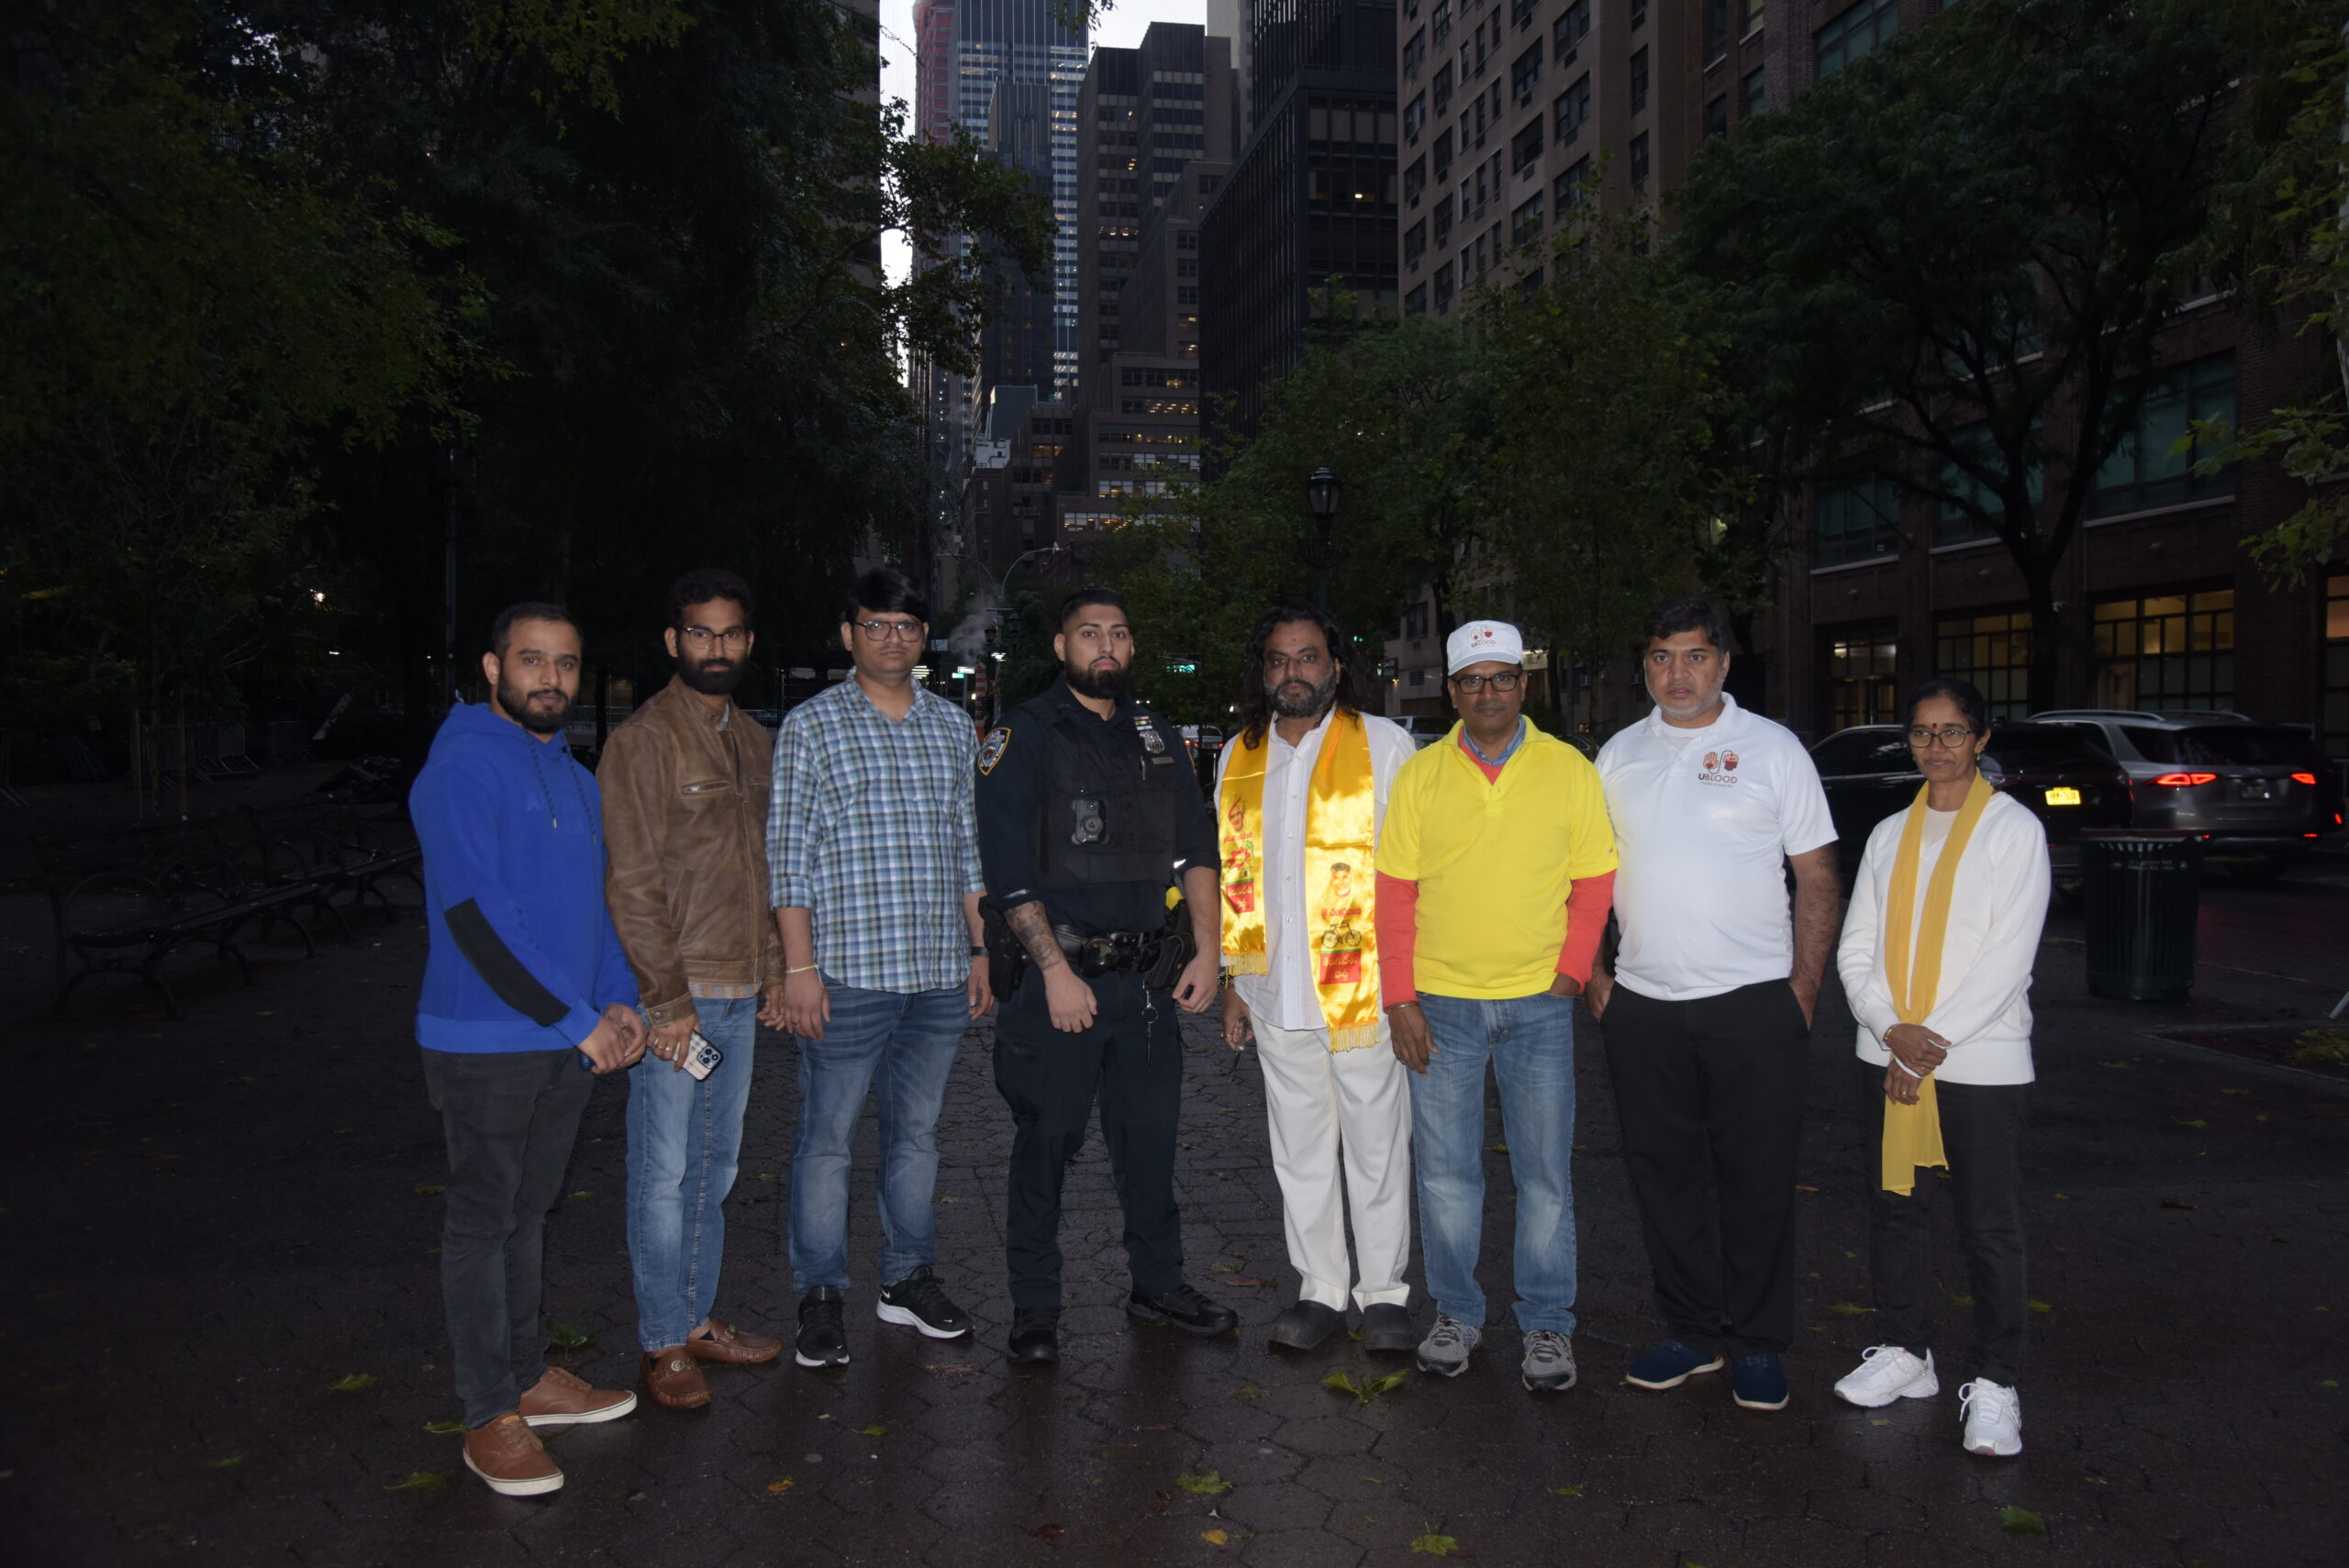 Dr Jai Yalamanchili and others protesting in Manhattan